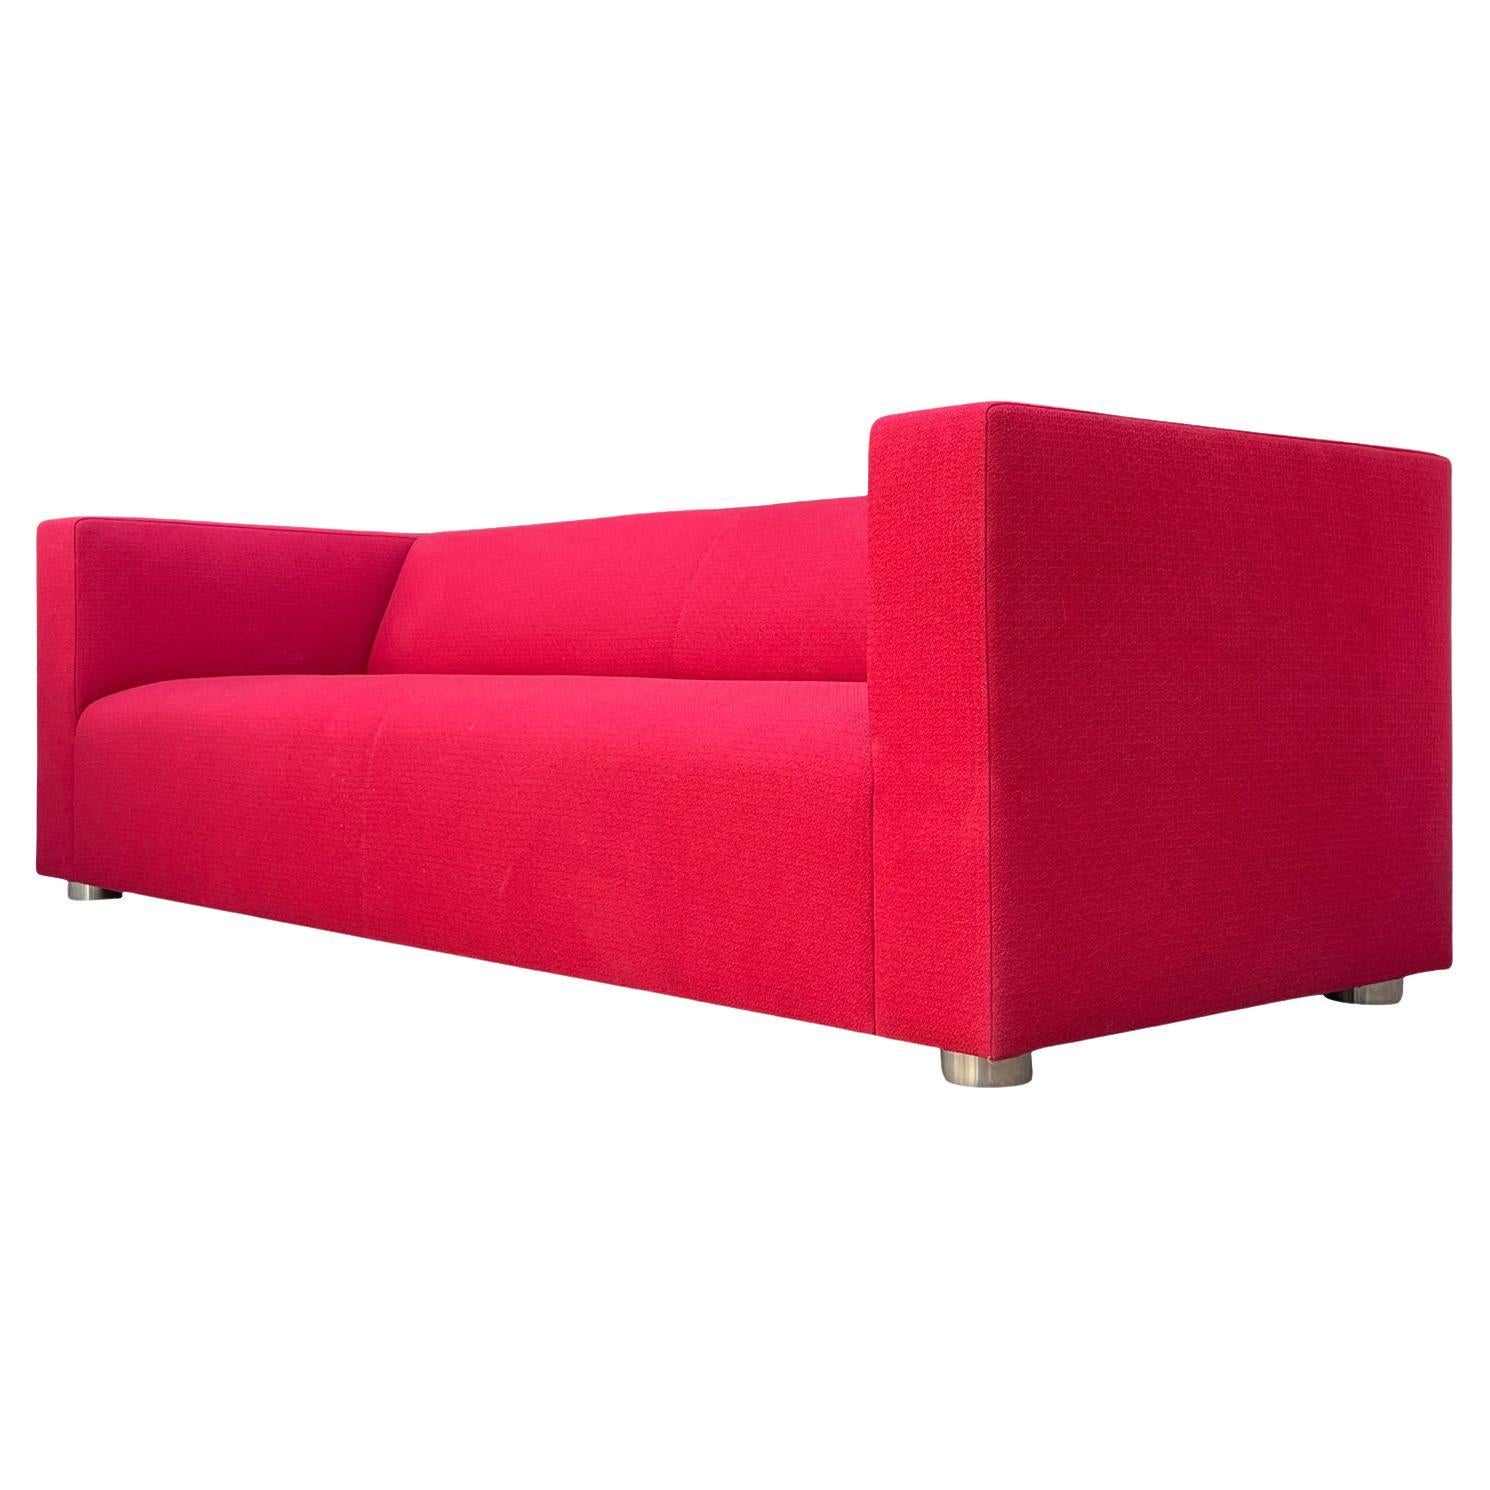 Edward Barber & Jay Osgerby Red Sofa For Knoll For Sale